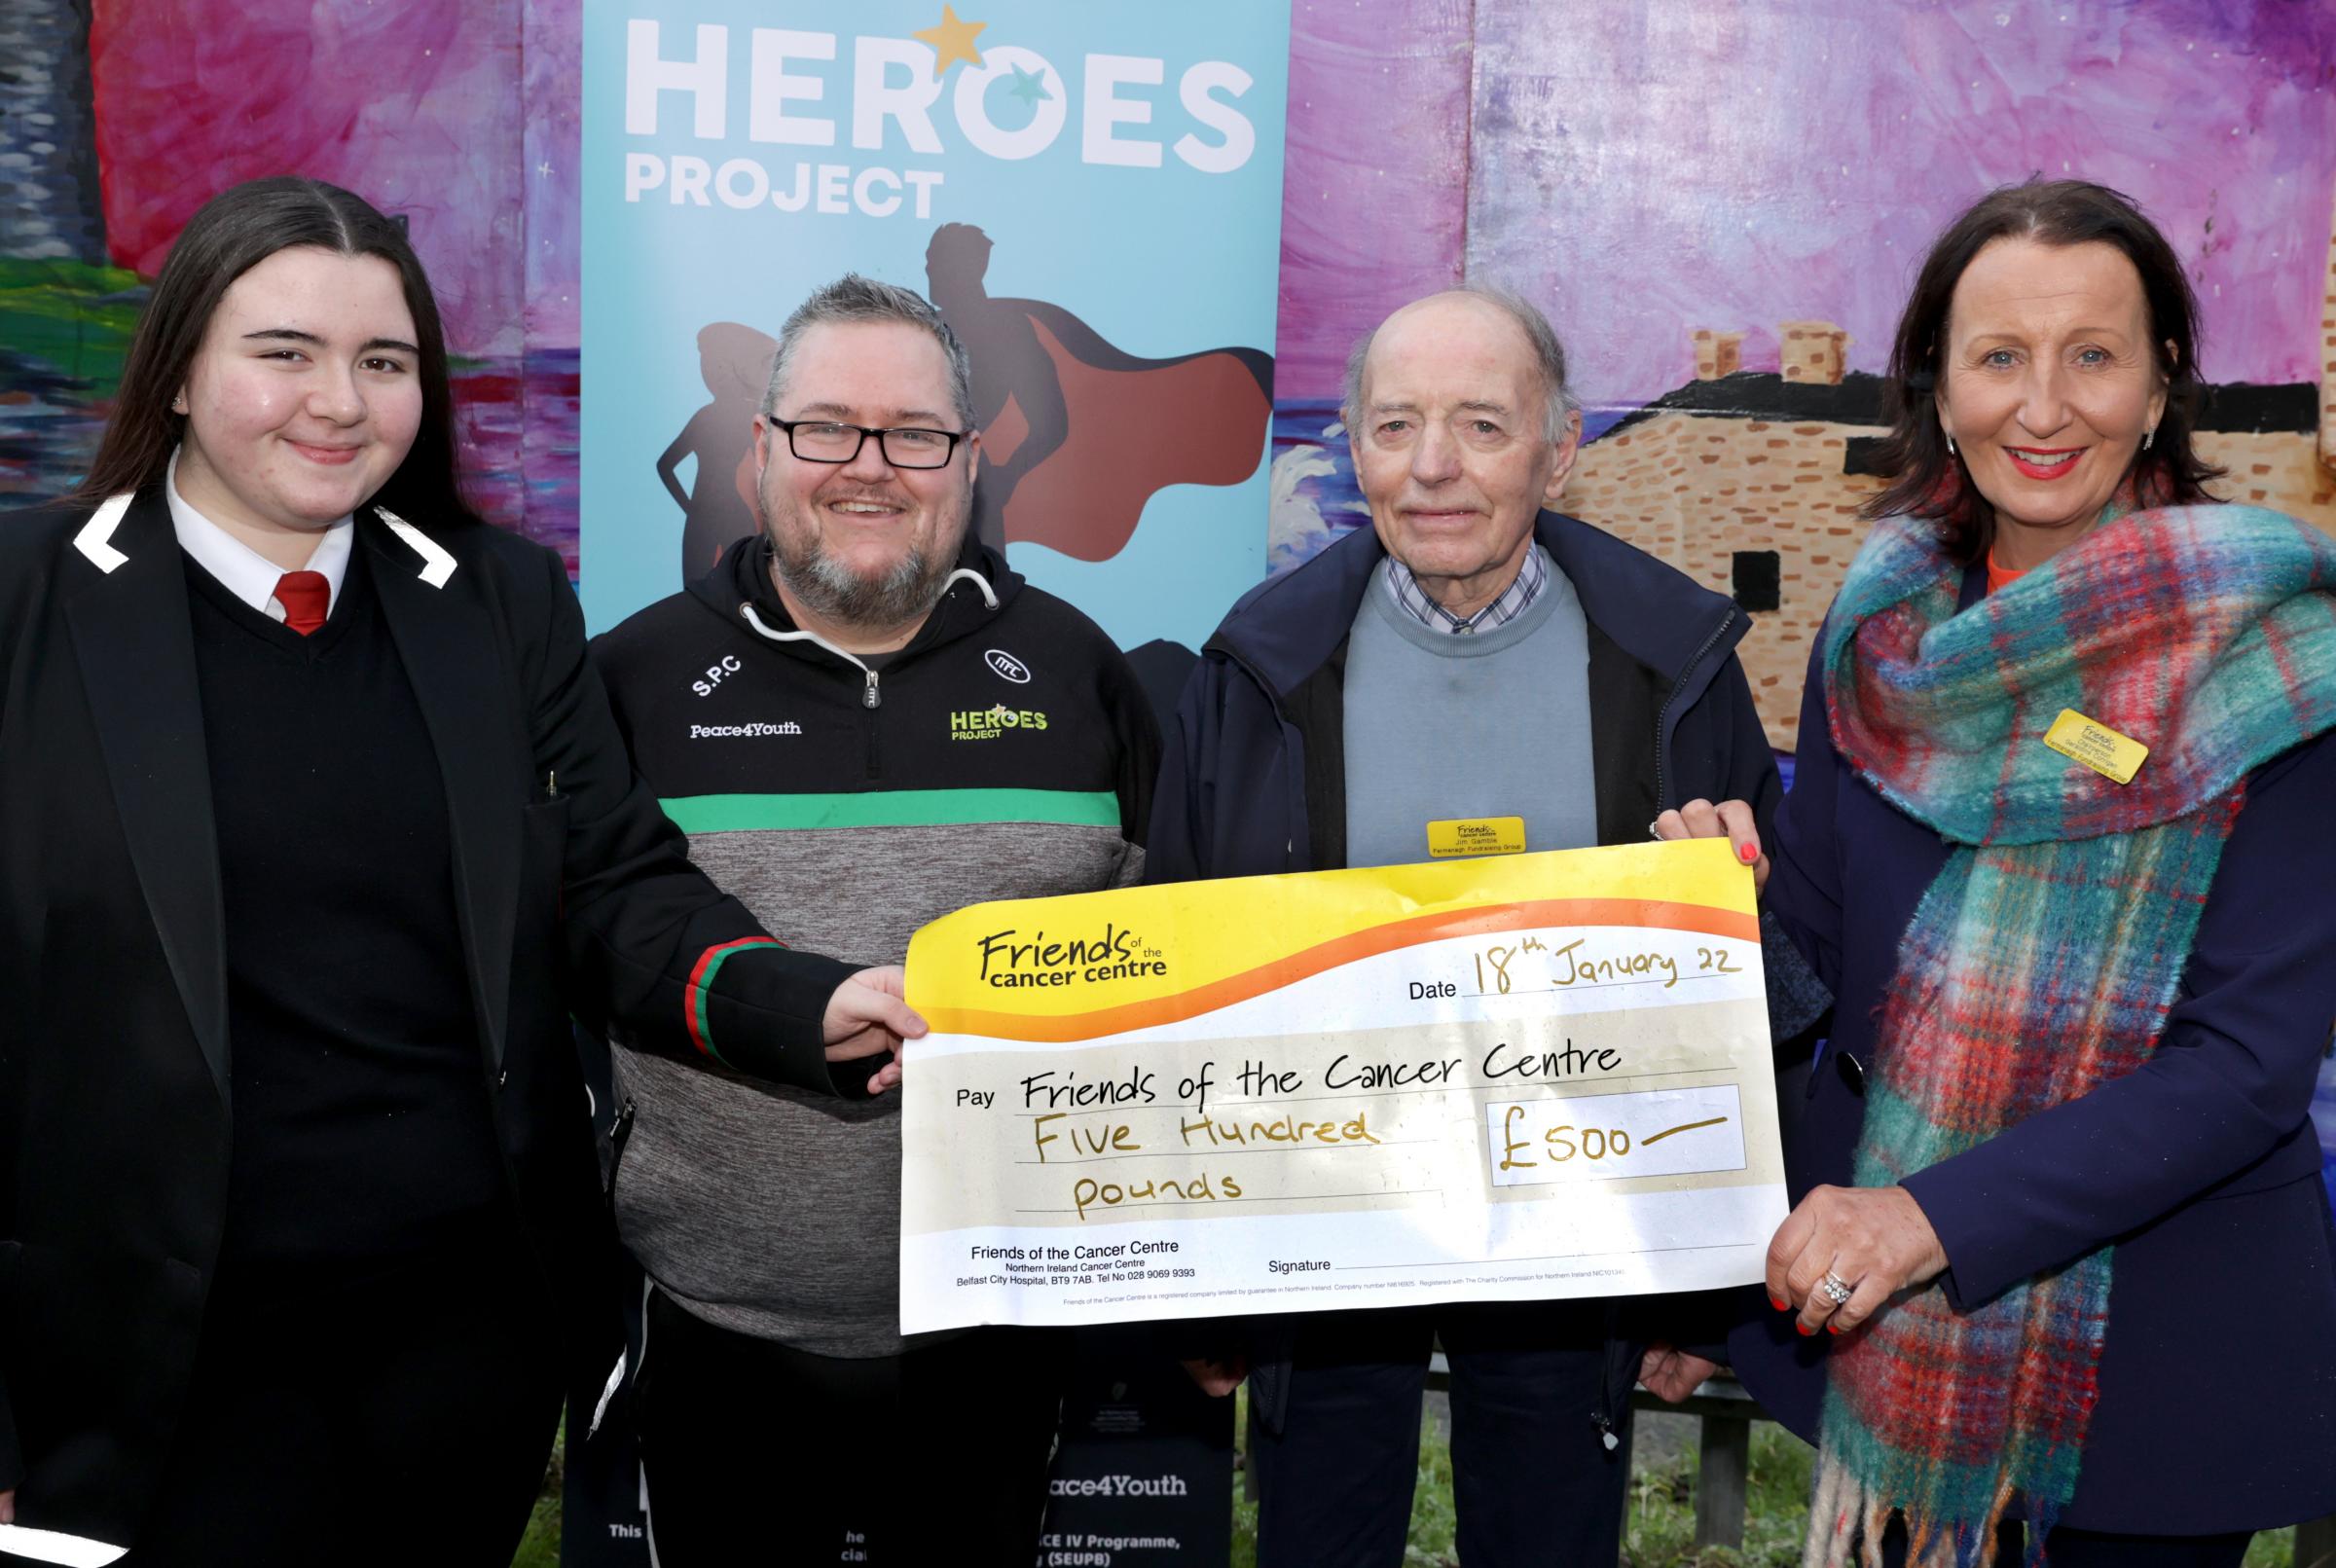 Danielle McCaffrey, (left), The Heroes Project, handing over a cheque to Jim Gamble, BEM and Geraldine Corrigan, Friends of The Cancer Centre Fermanagh Branch. Also included is John Paul Curry, (second left), co-ordinator Devenish Partnership.